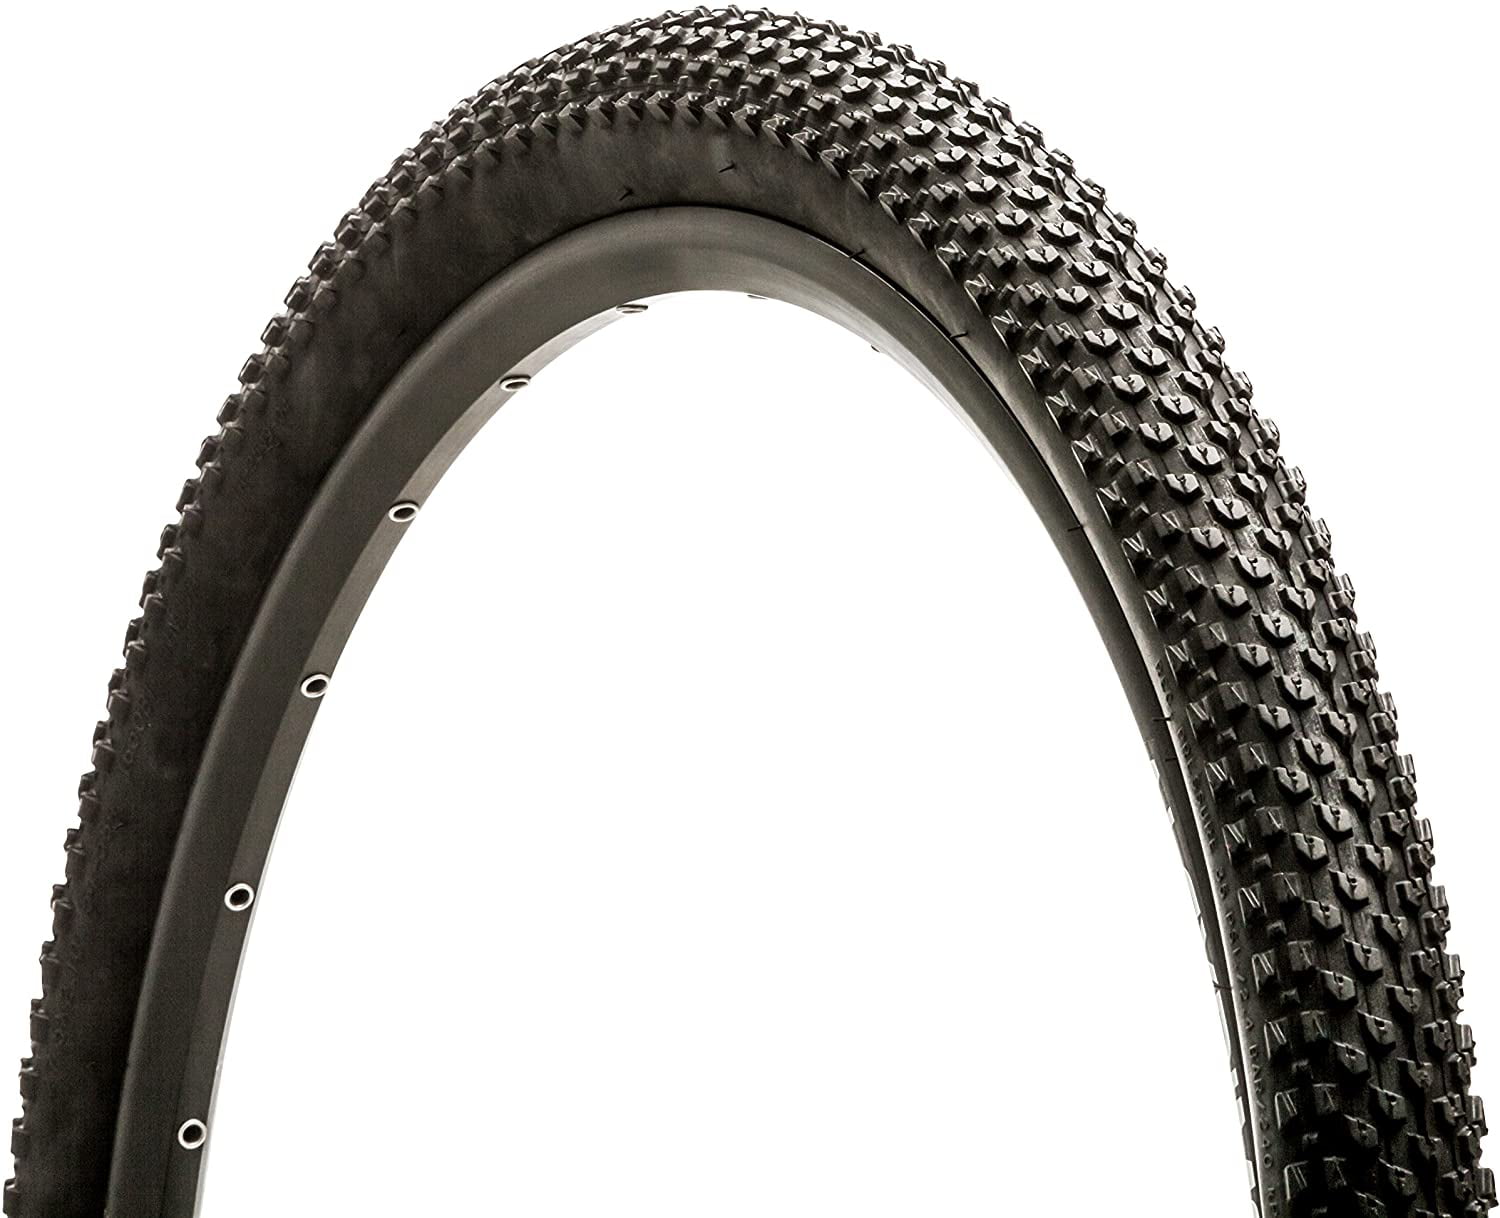 Details about   6 pcs 20" inch BIKE TUBE Bicycle Tire Inner Interior Rubber 20 x 1.75-2.125 